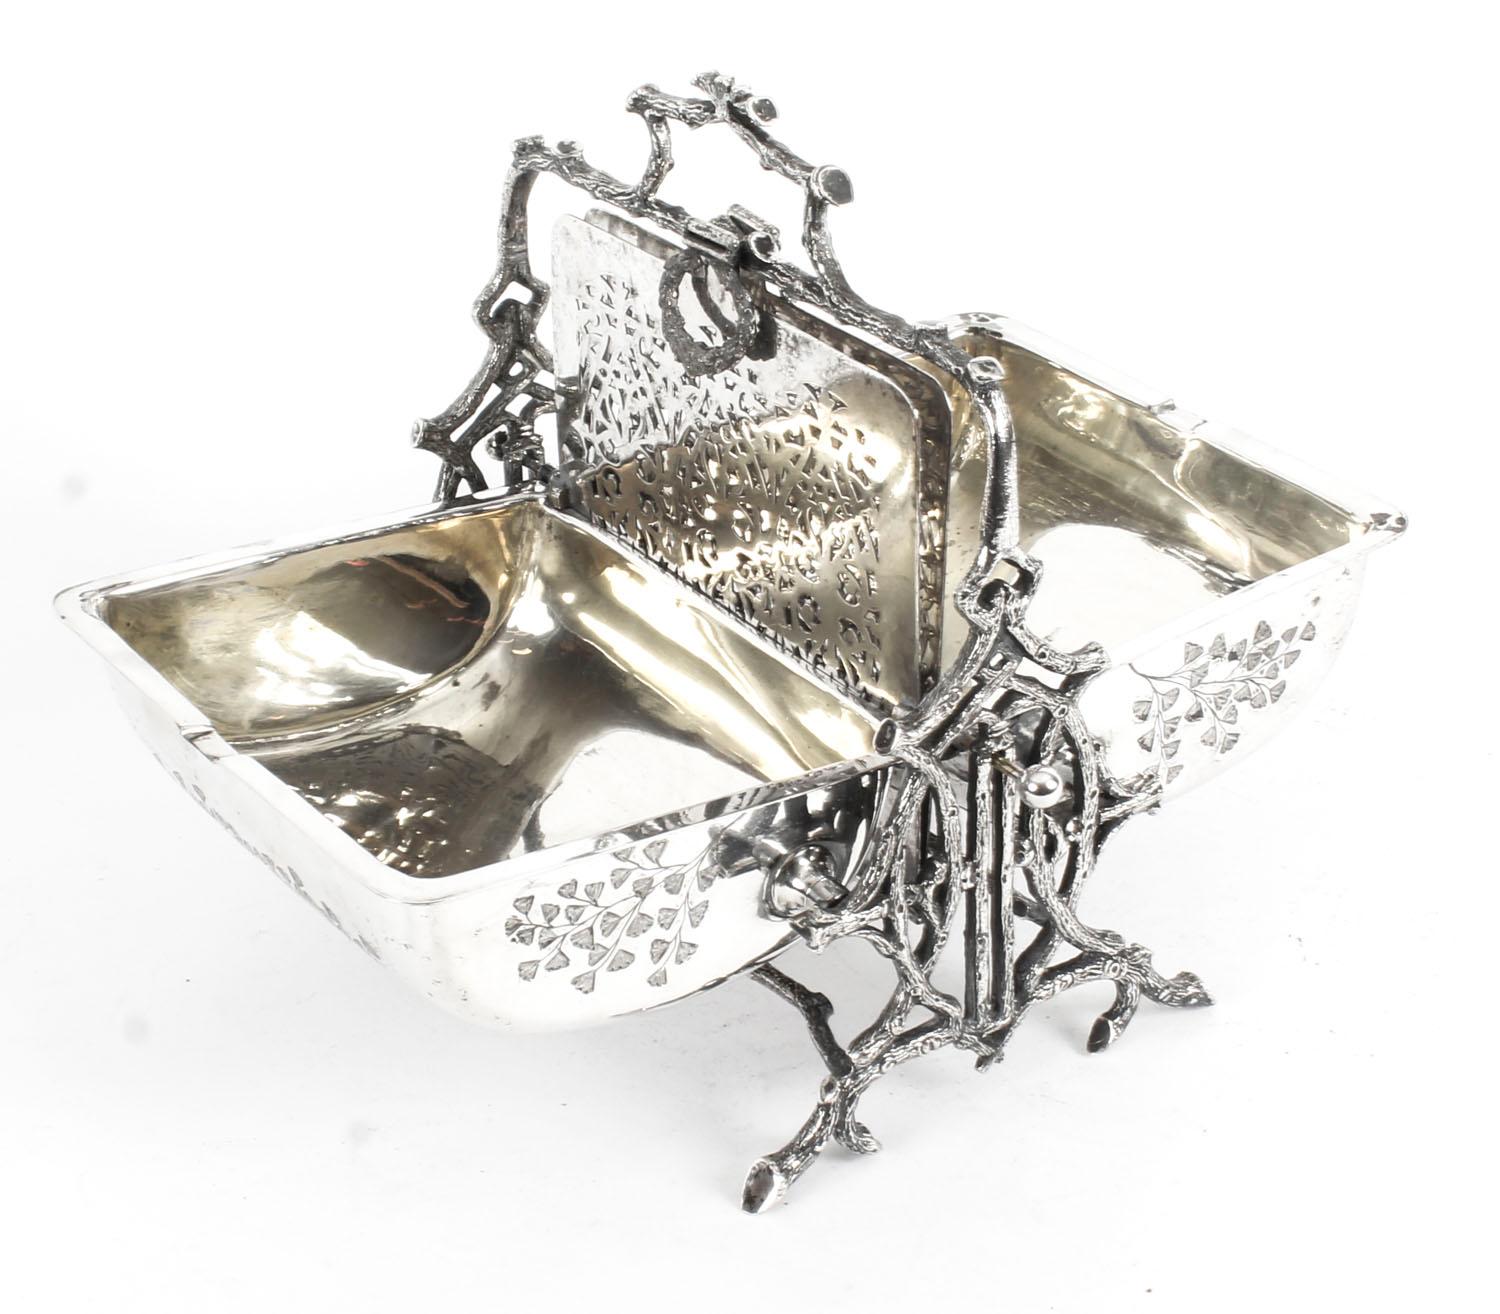 Antique English Silver Plated Folding Sweets Biscuit Box, 19th Century 5